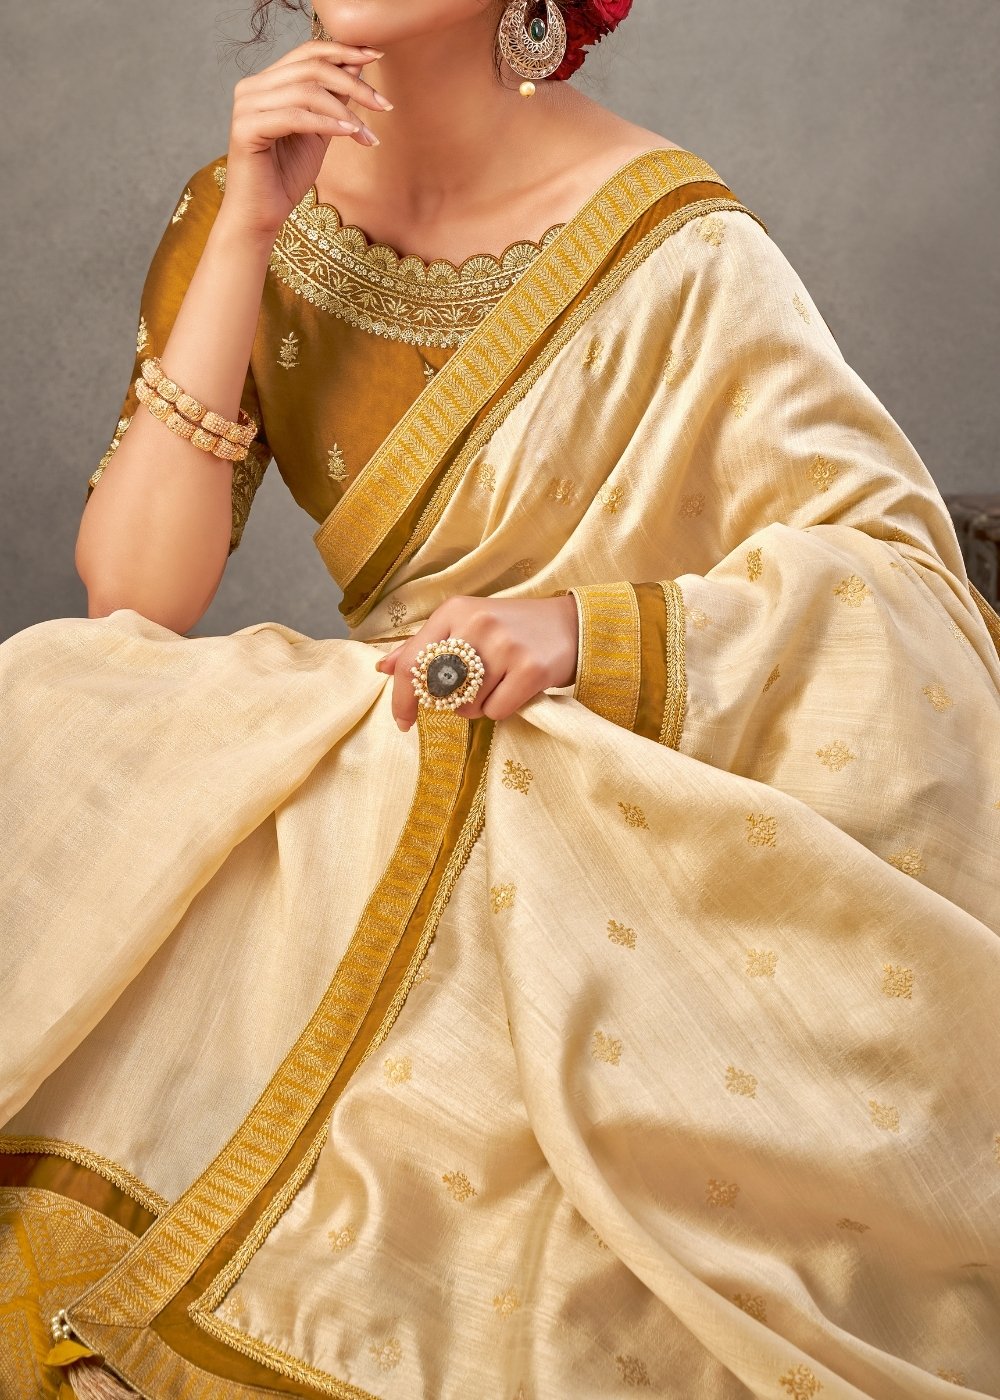 Off White Tussar Silk Saree with Zari & Sequins Embroidery